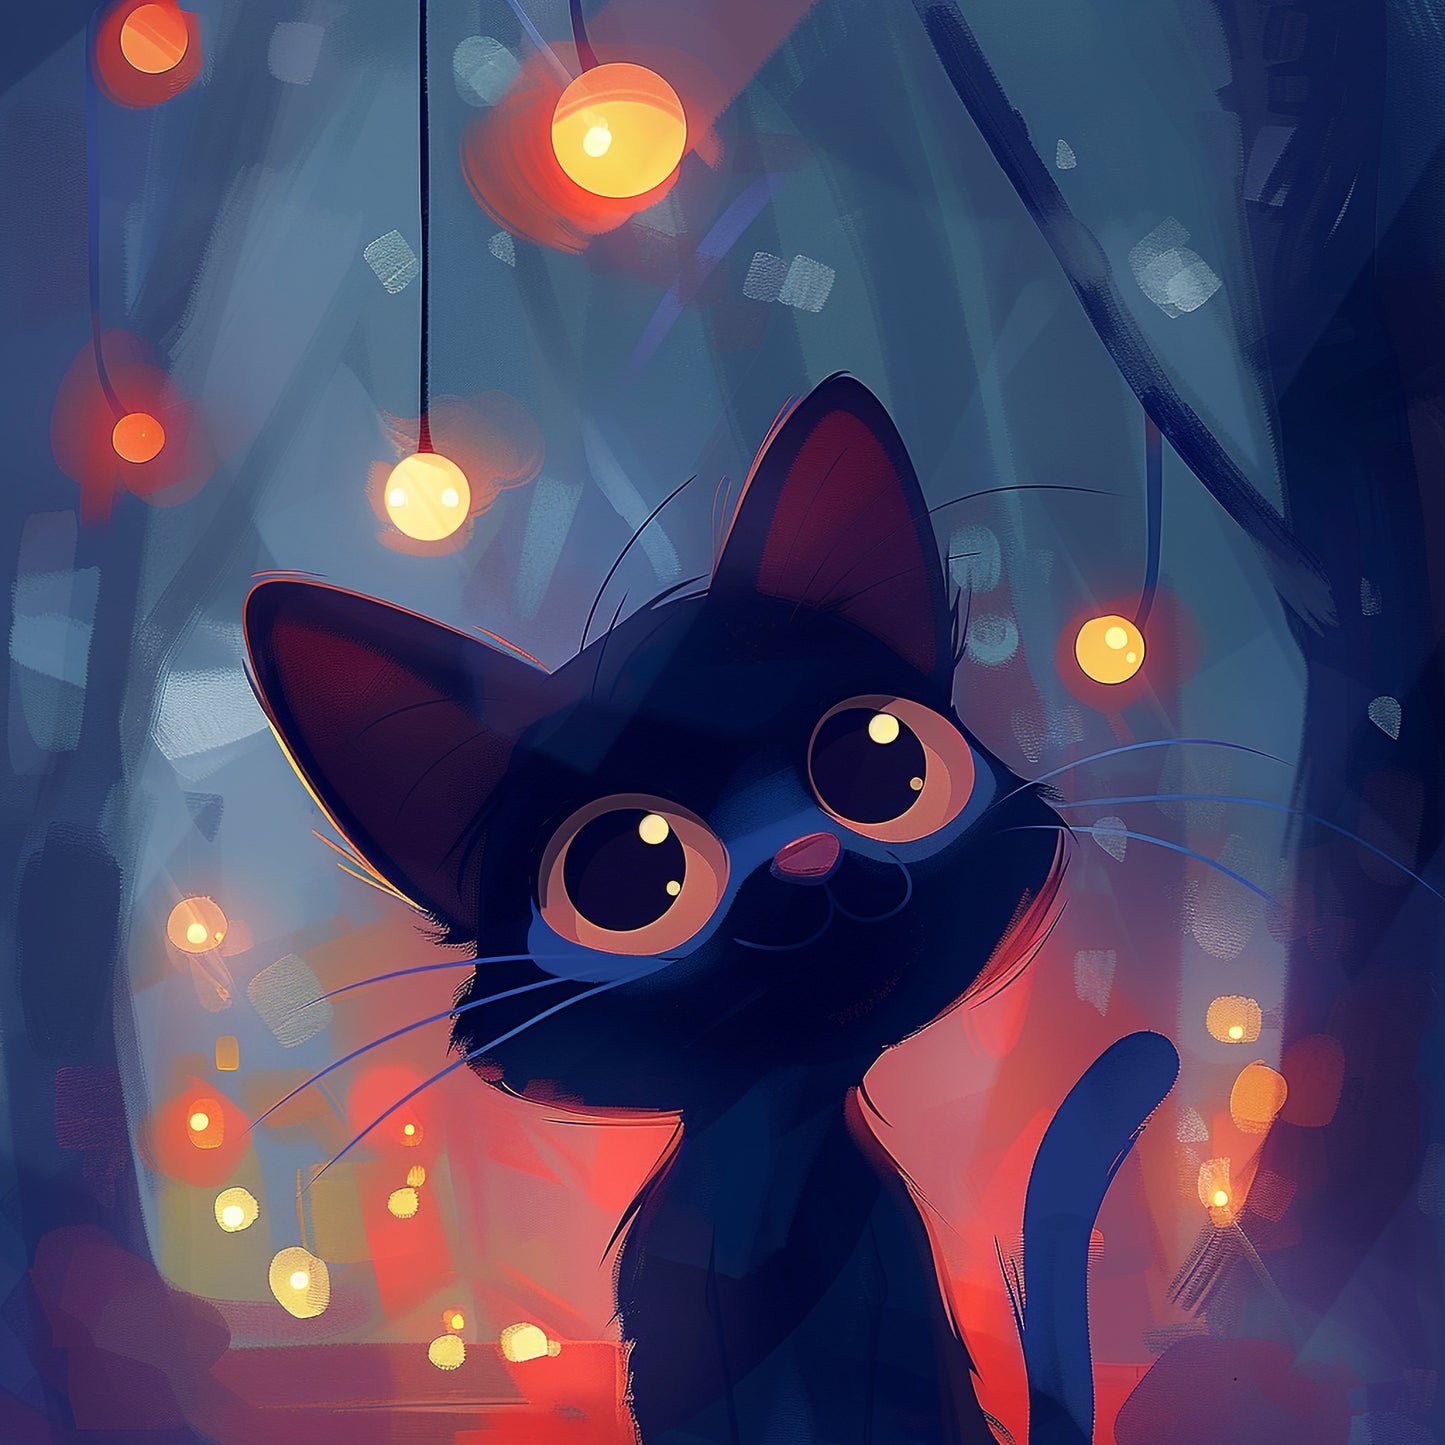 Dreamy Illustrated Black Cat with Enchanting Lights